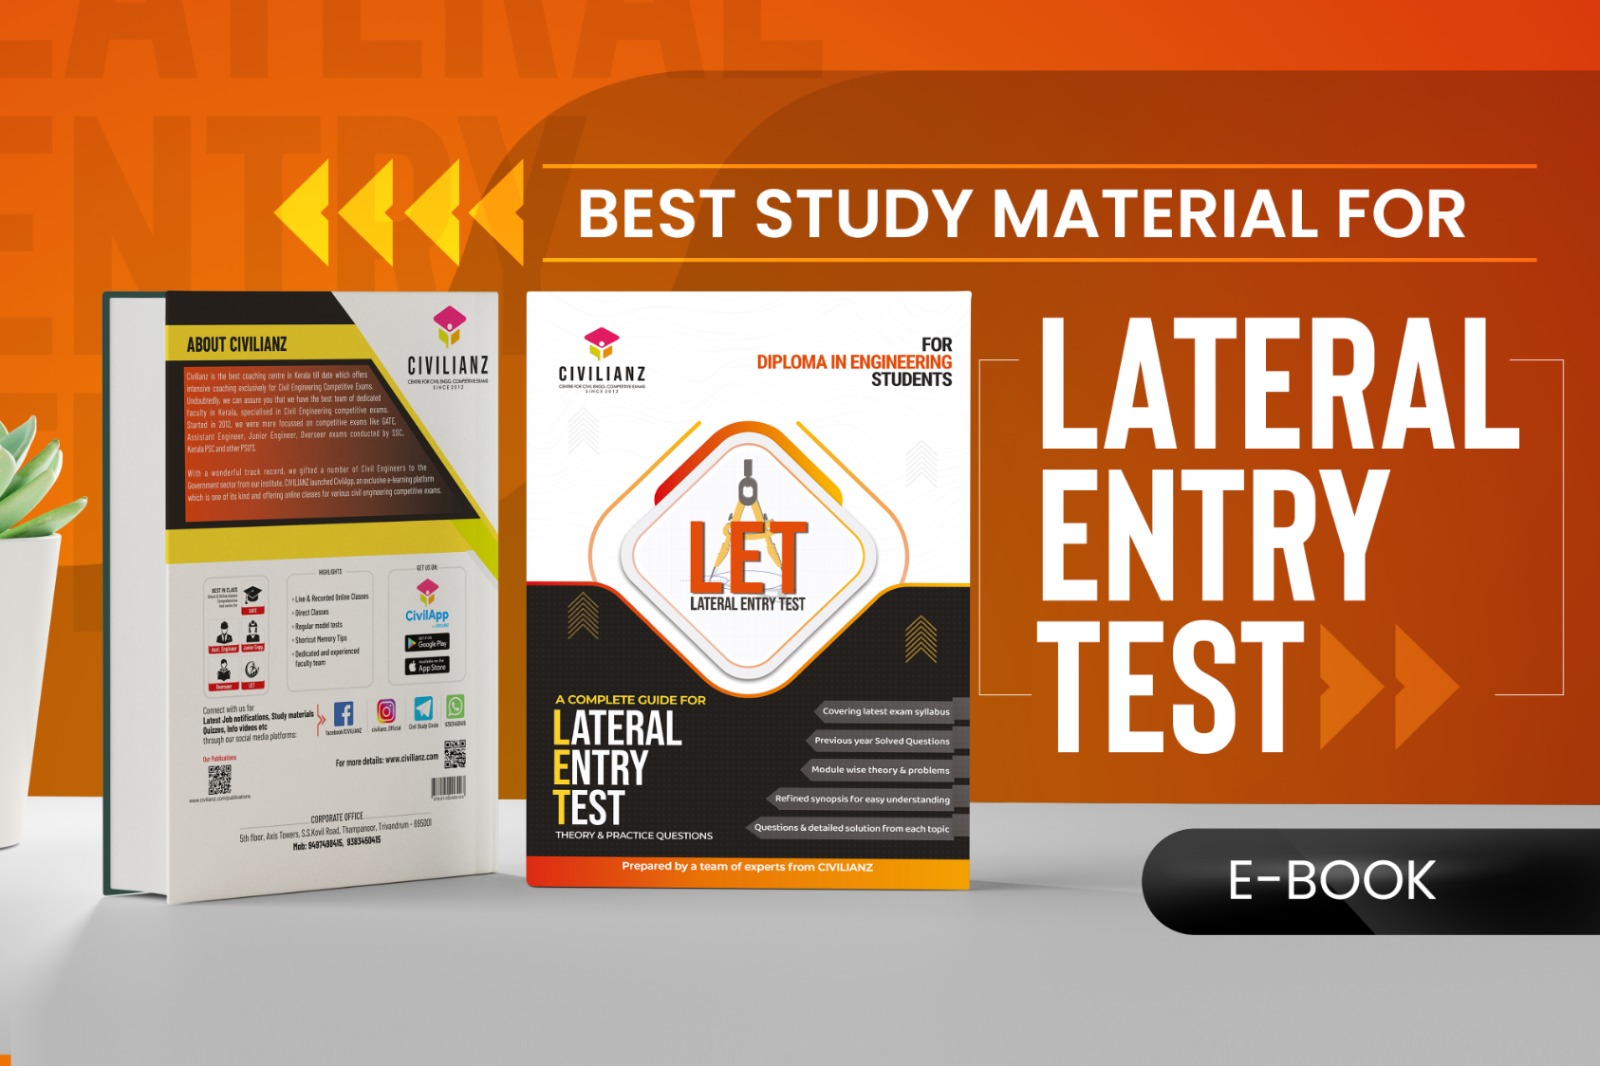 DOWNLOAD FREE PDF | BEST STUDY MATERIAL FOR LATERAL ENTRY TEST- E-BOOK